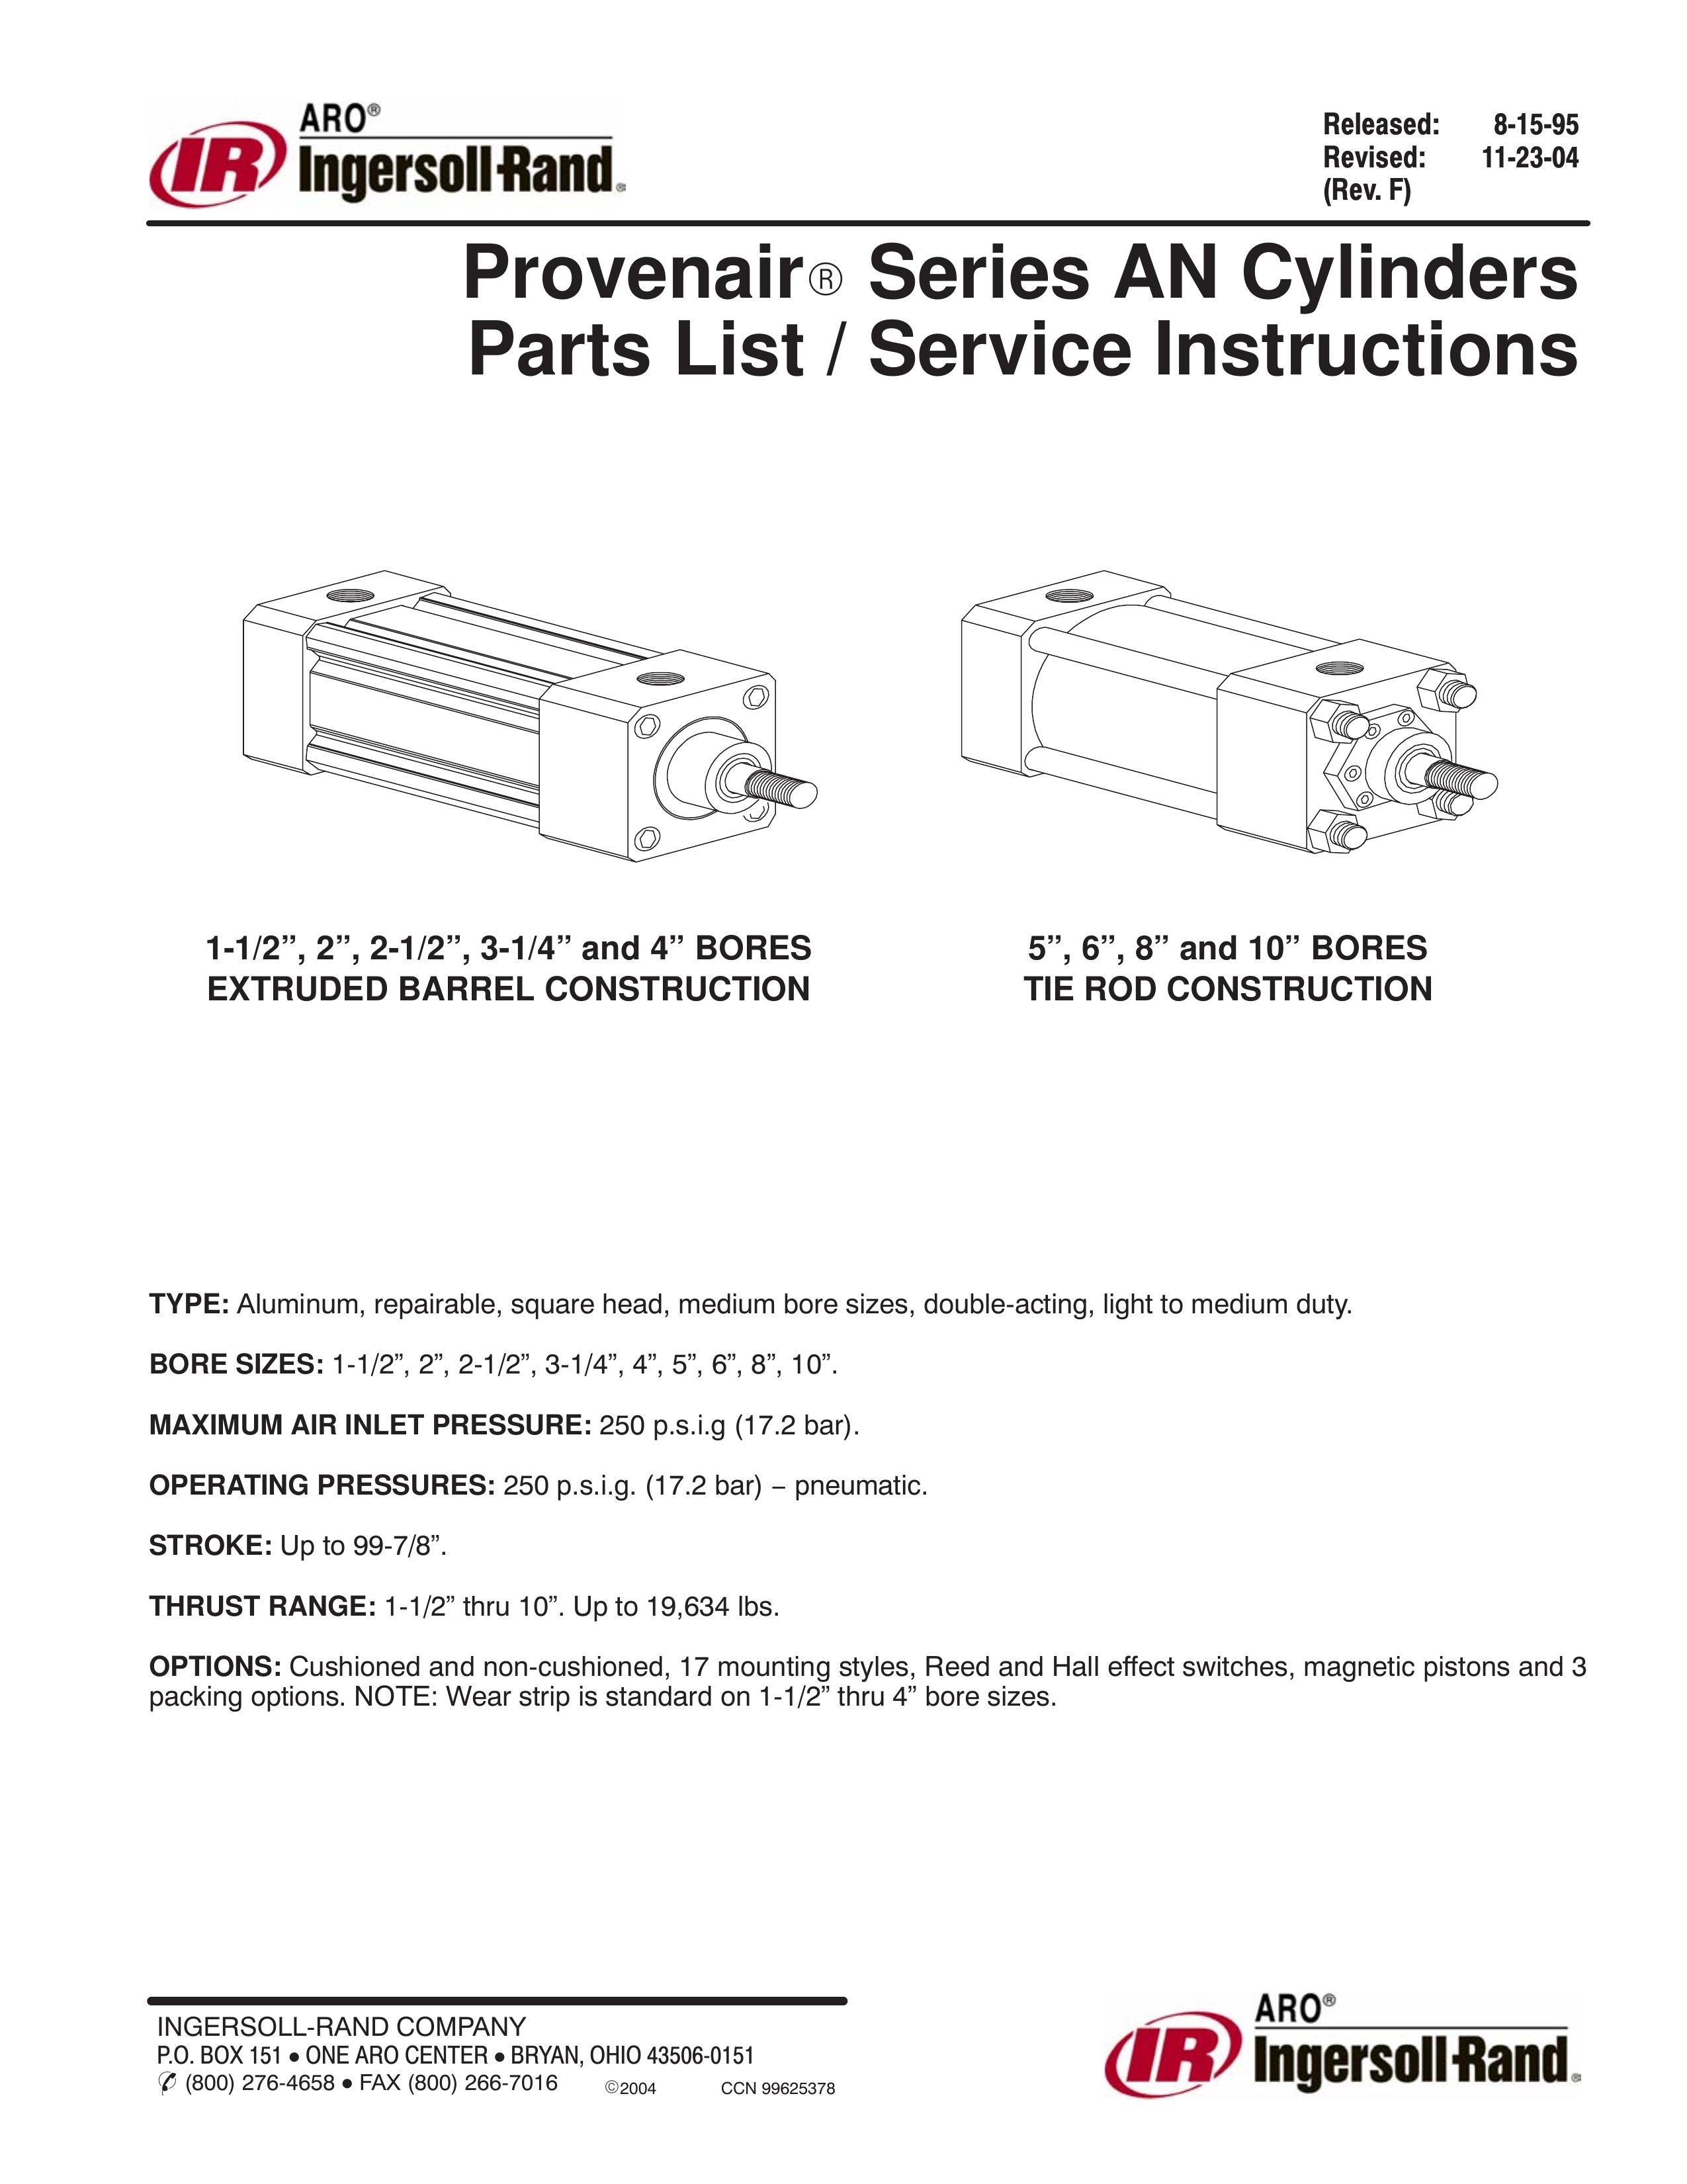 Ingersoll-Rand 8 and 10 BORES Marine Safety Devices User Manual